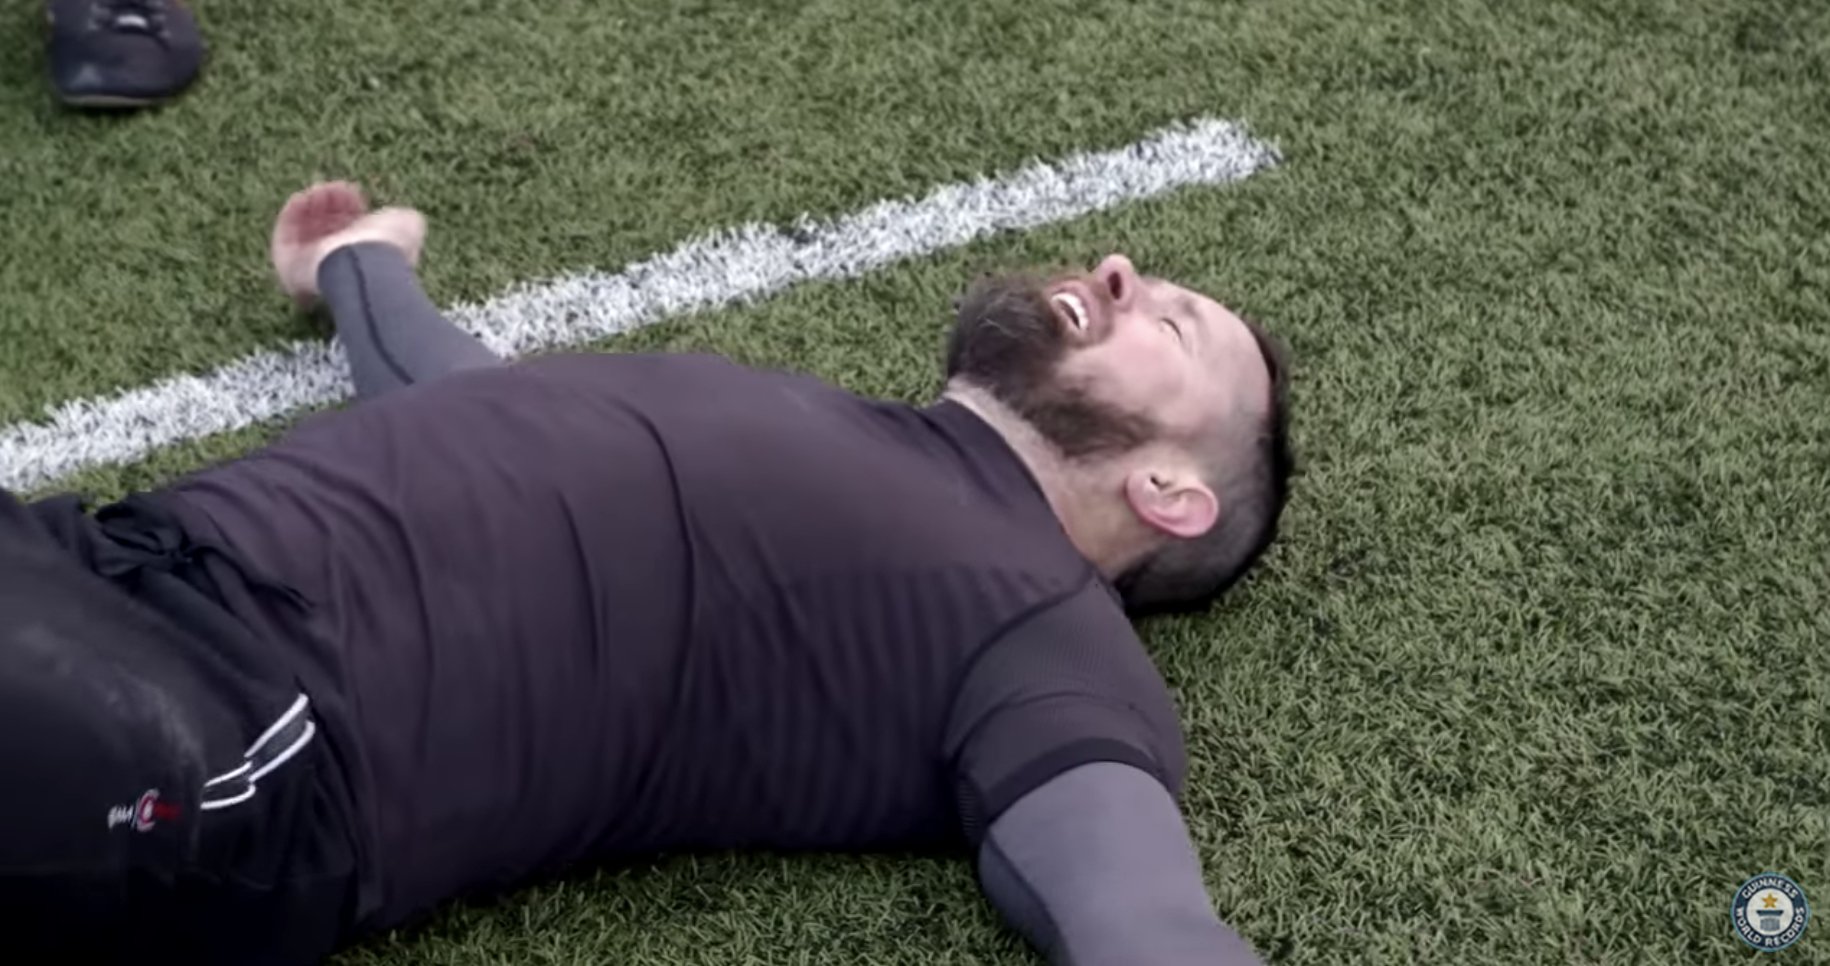 WATCH: Shane Williams has completed the World Record for most tackles in one minute